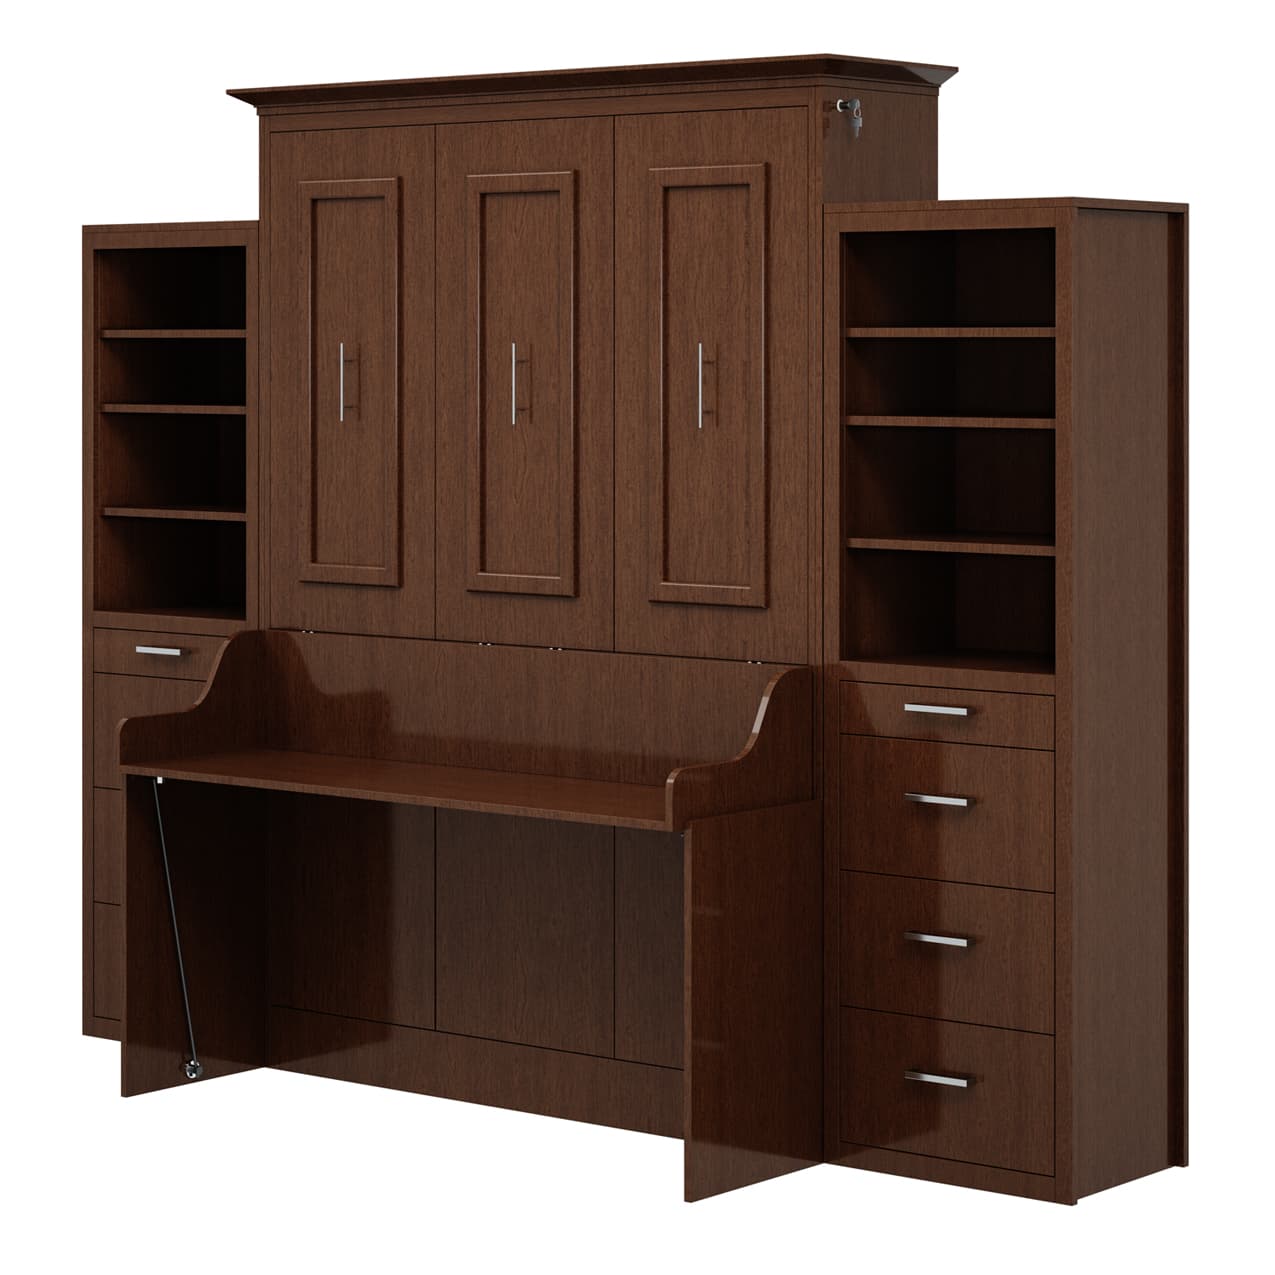 coventry quee full double murphy bed with desk and 2 storage cabinets pull down fold out hidden wall bed diy murphy bed kit office bed murphy desk bed combo hideaway wall cabinet adjustable shelves pullout nightstand drawers 